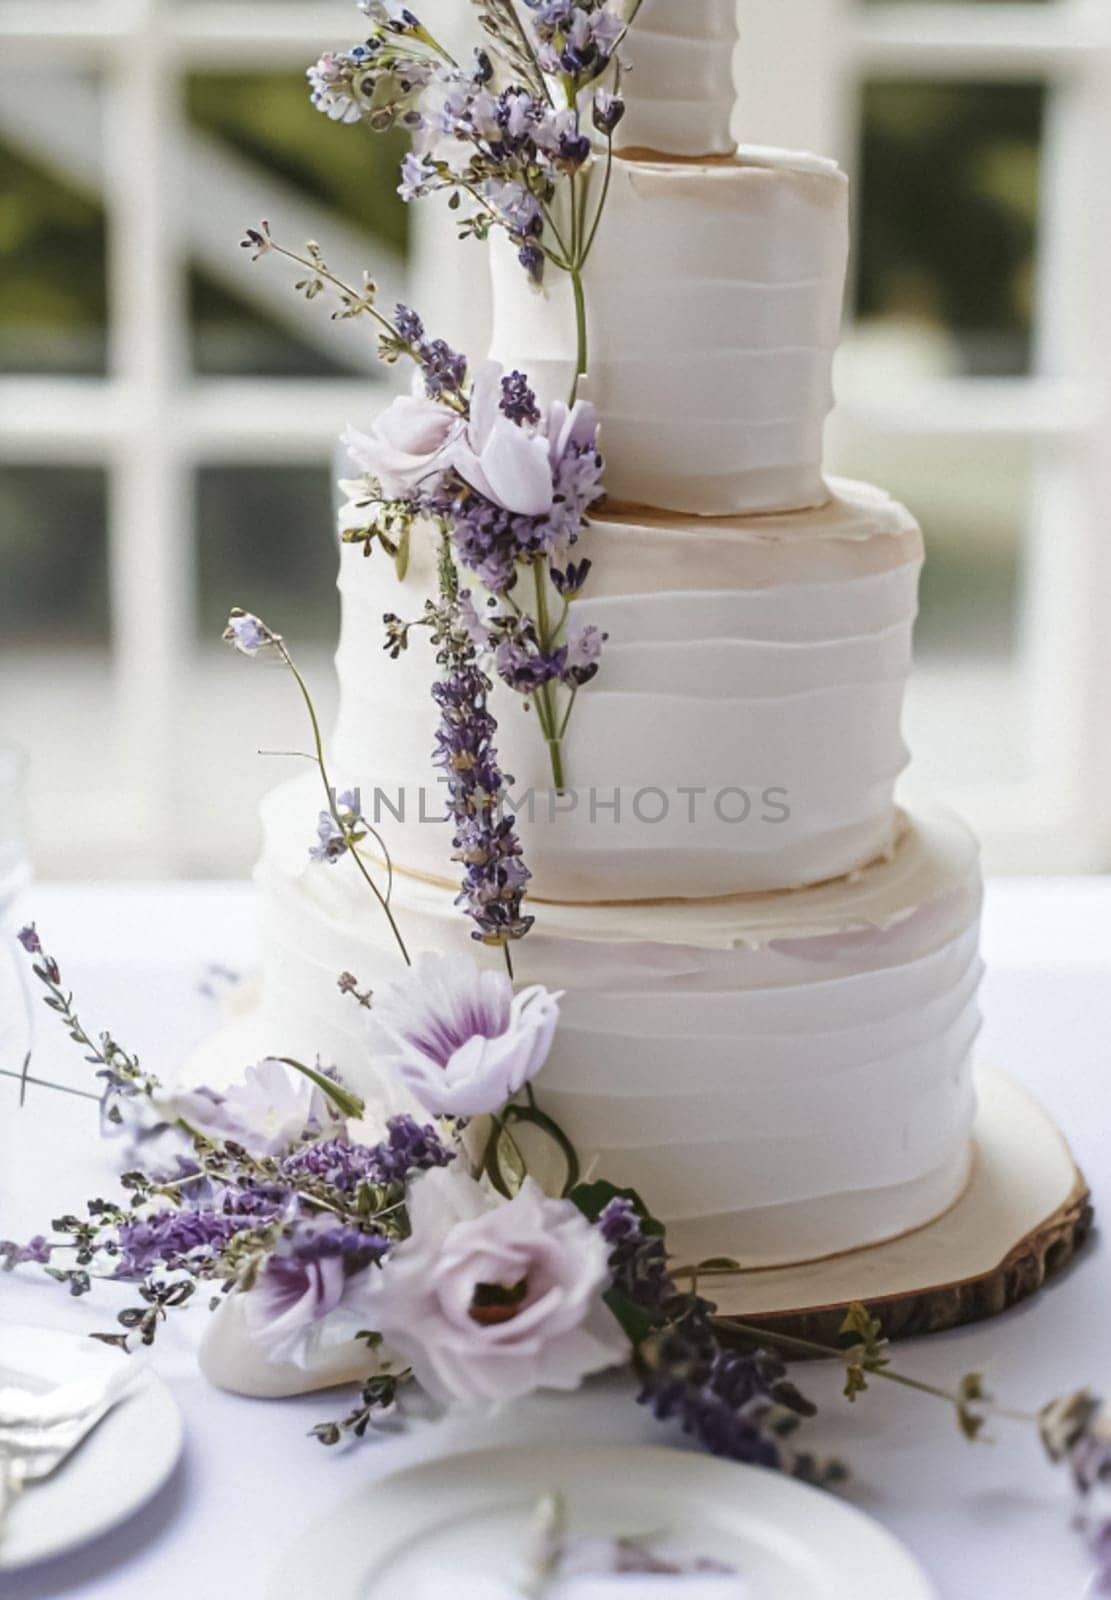 Wedding table decoration with lavender flowers, sweets and cake by Olayola